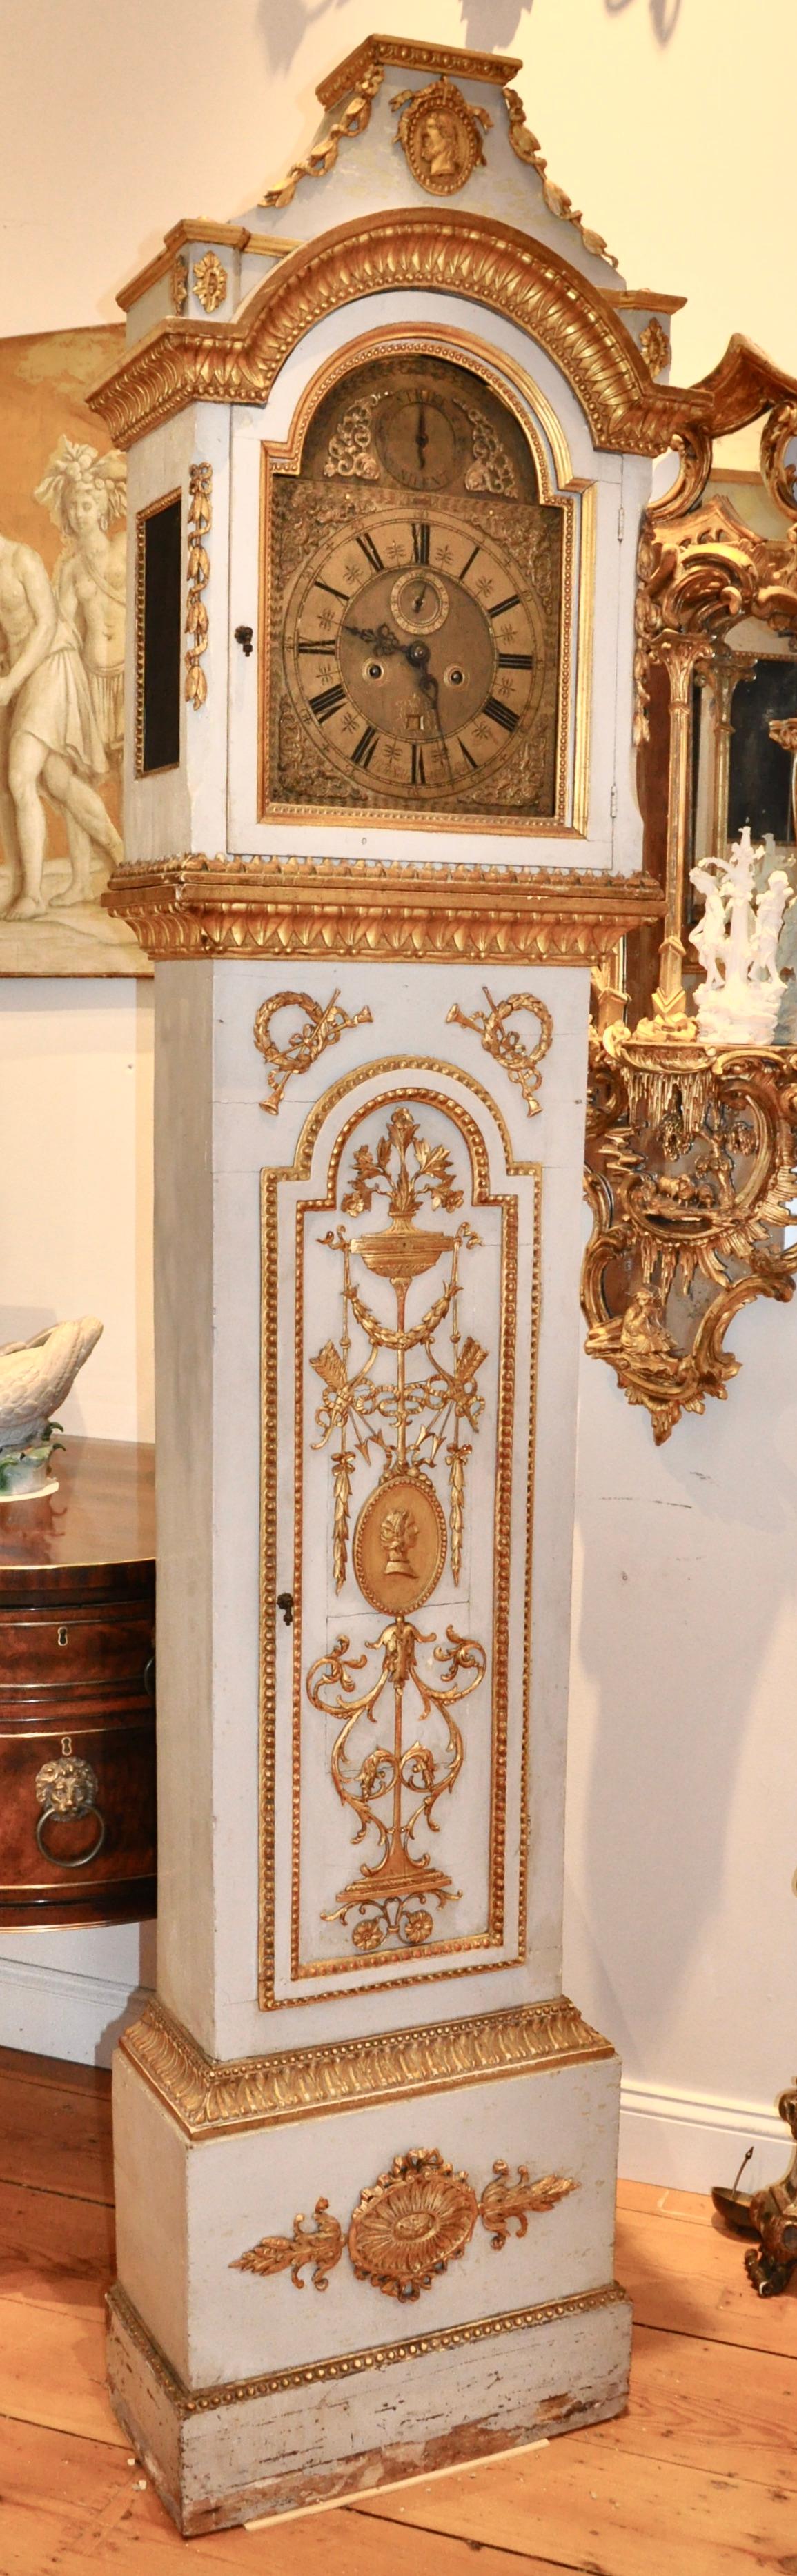 Early 19th century Danish carved and giltwood neoclassical tall case clock. Original gilding on all hand carved neoclassical ornamentation. Palace provenance, more than likely. Profile of each a man and a woman, most likely nobility or from the